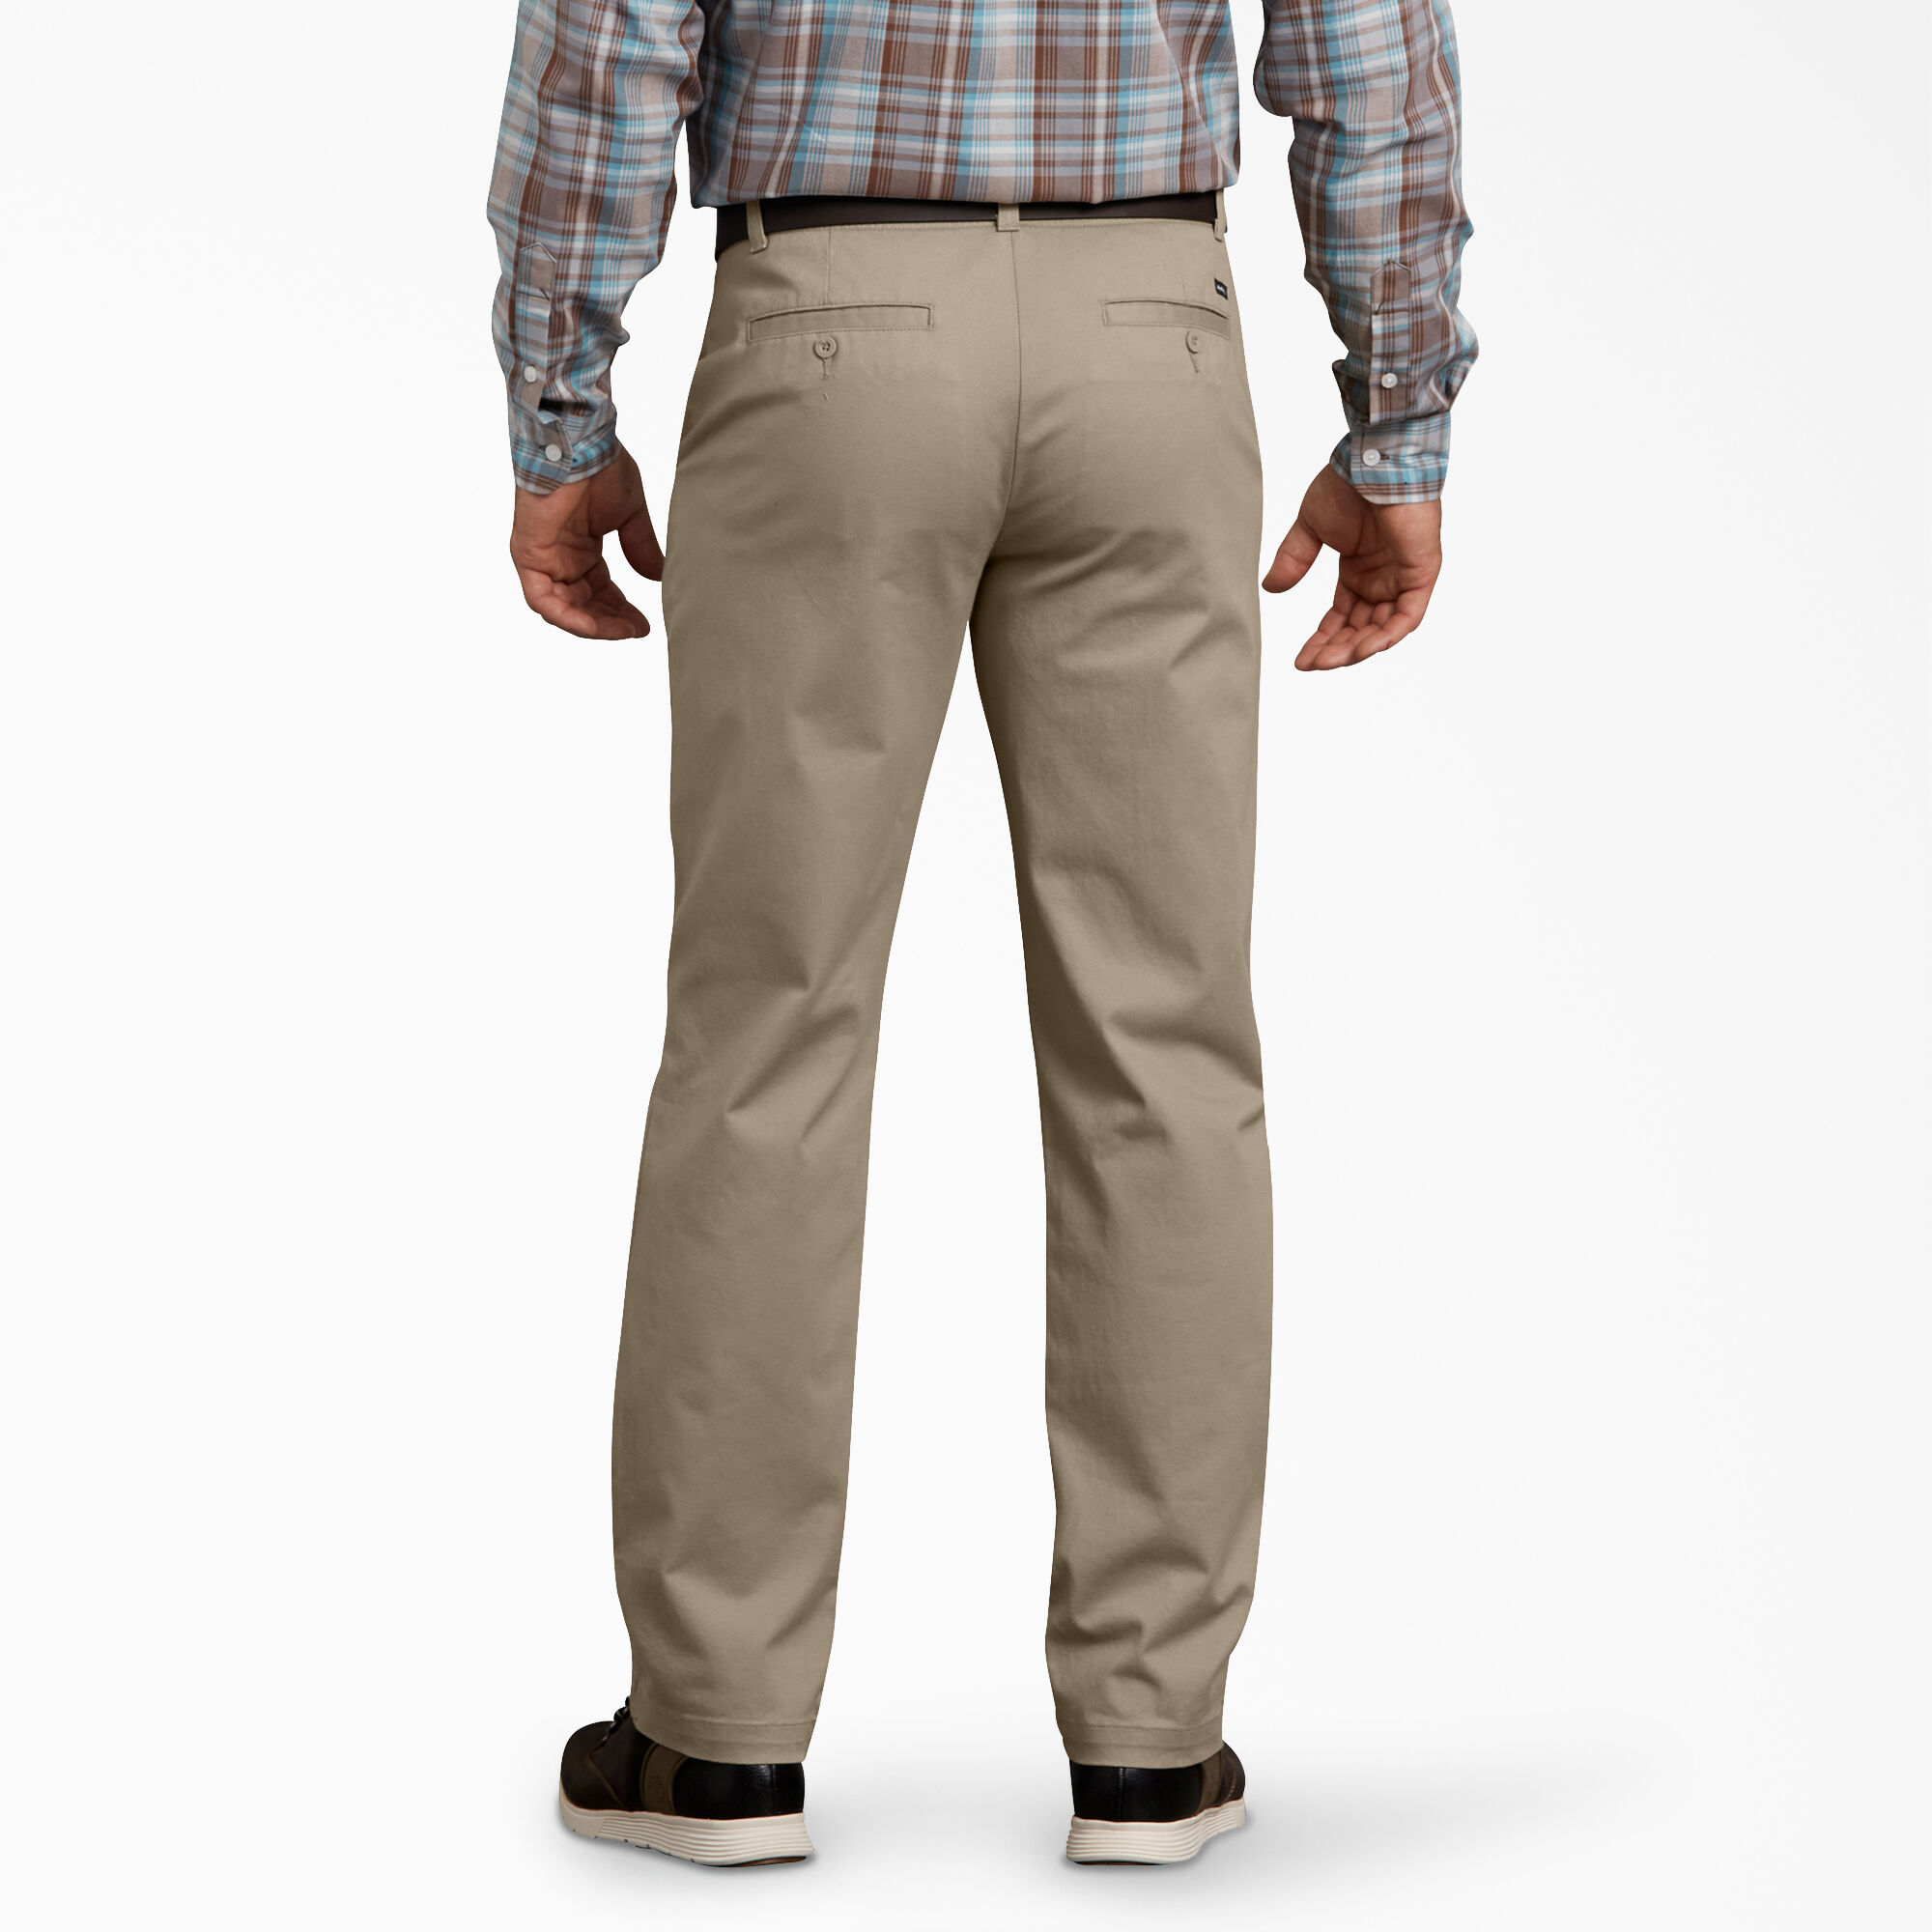 Details about   Dickies Men's Flex Washed Chino Pant-Regular Taper Choose SZ/color 